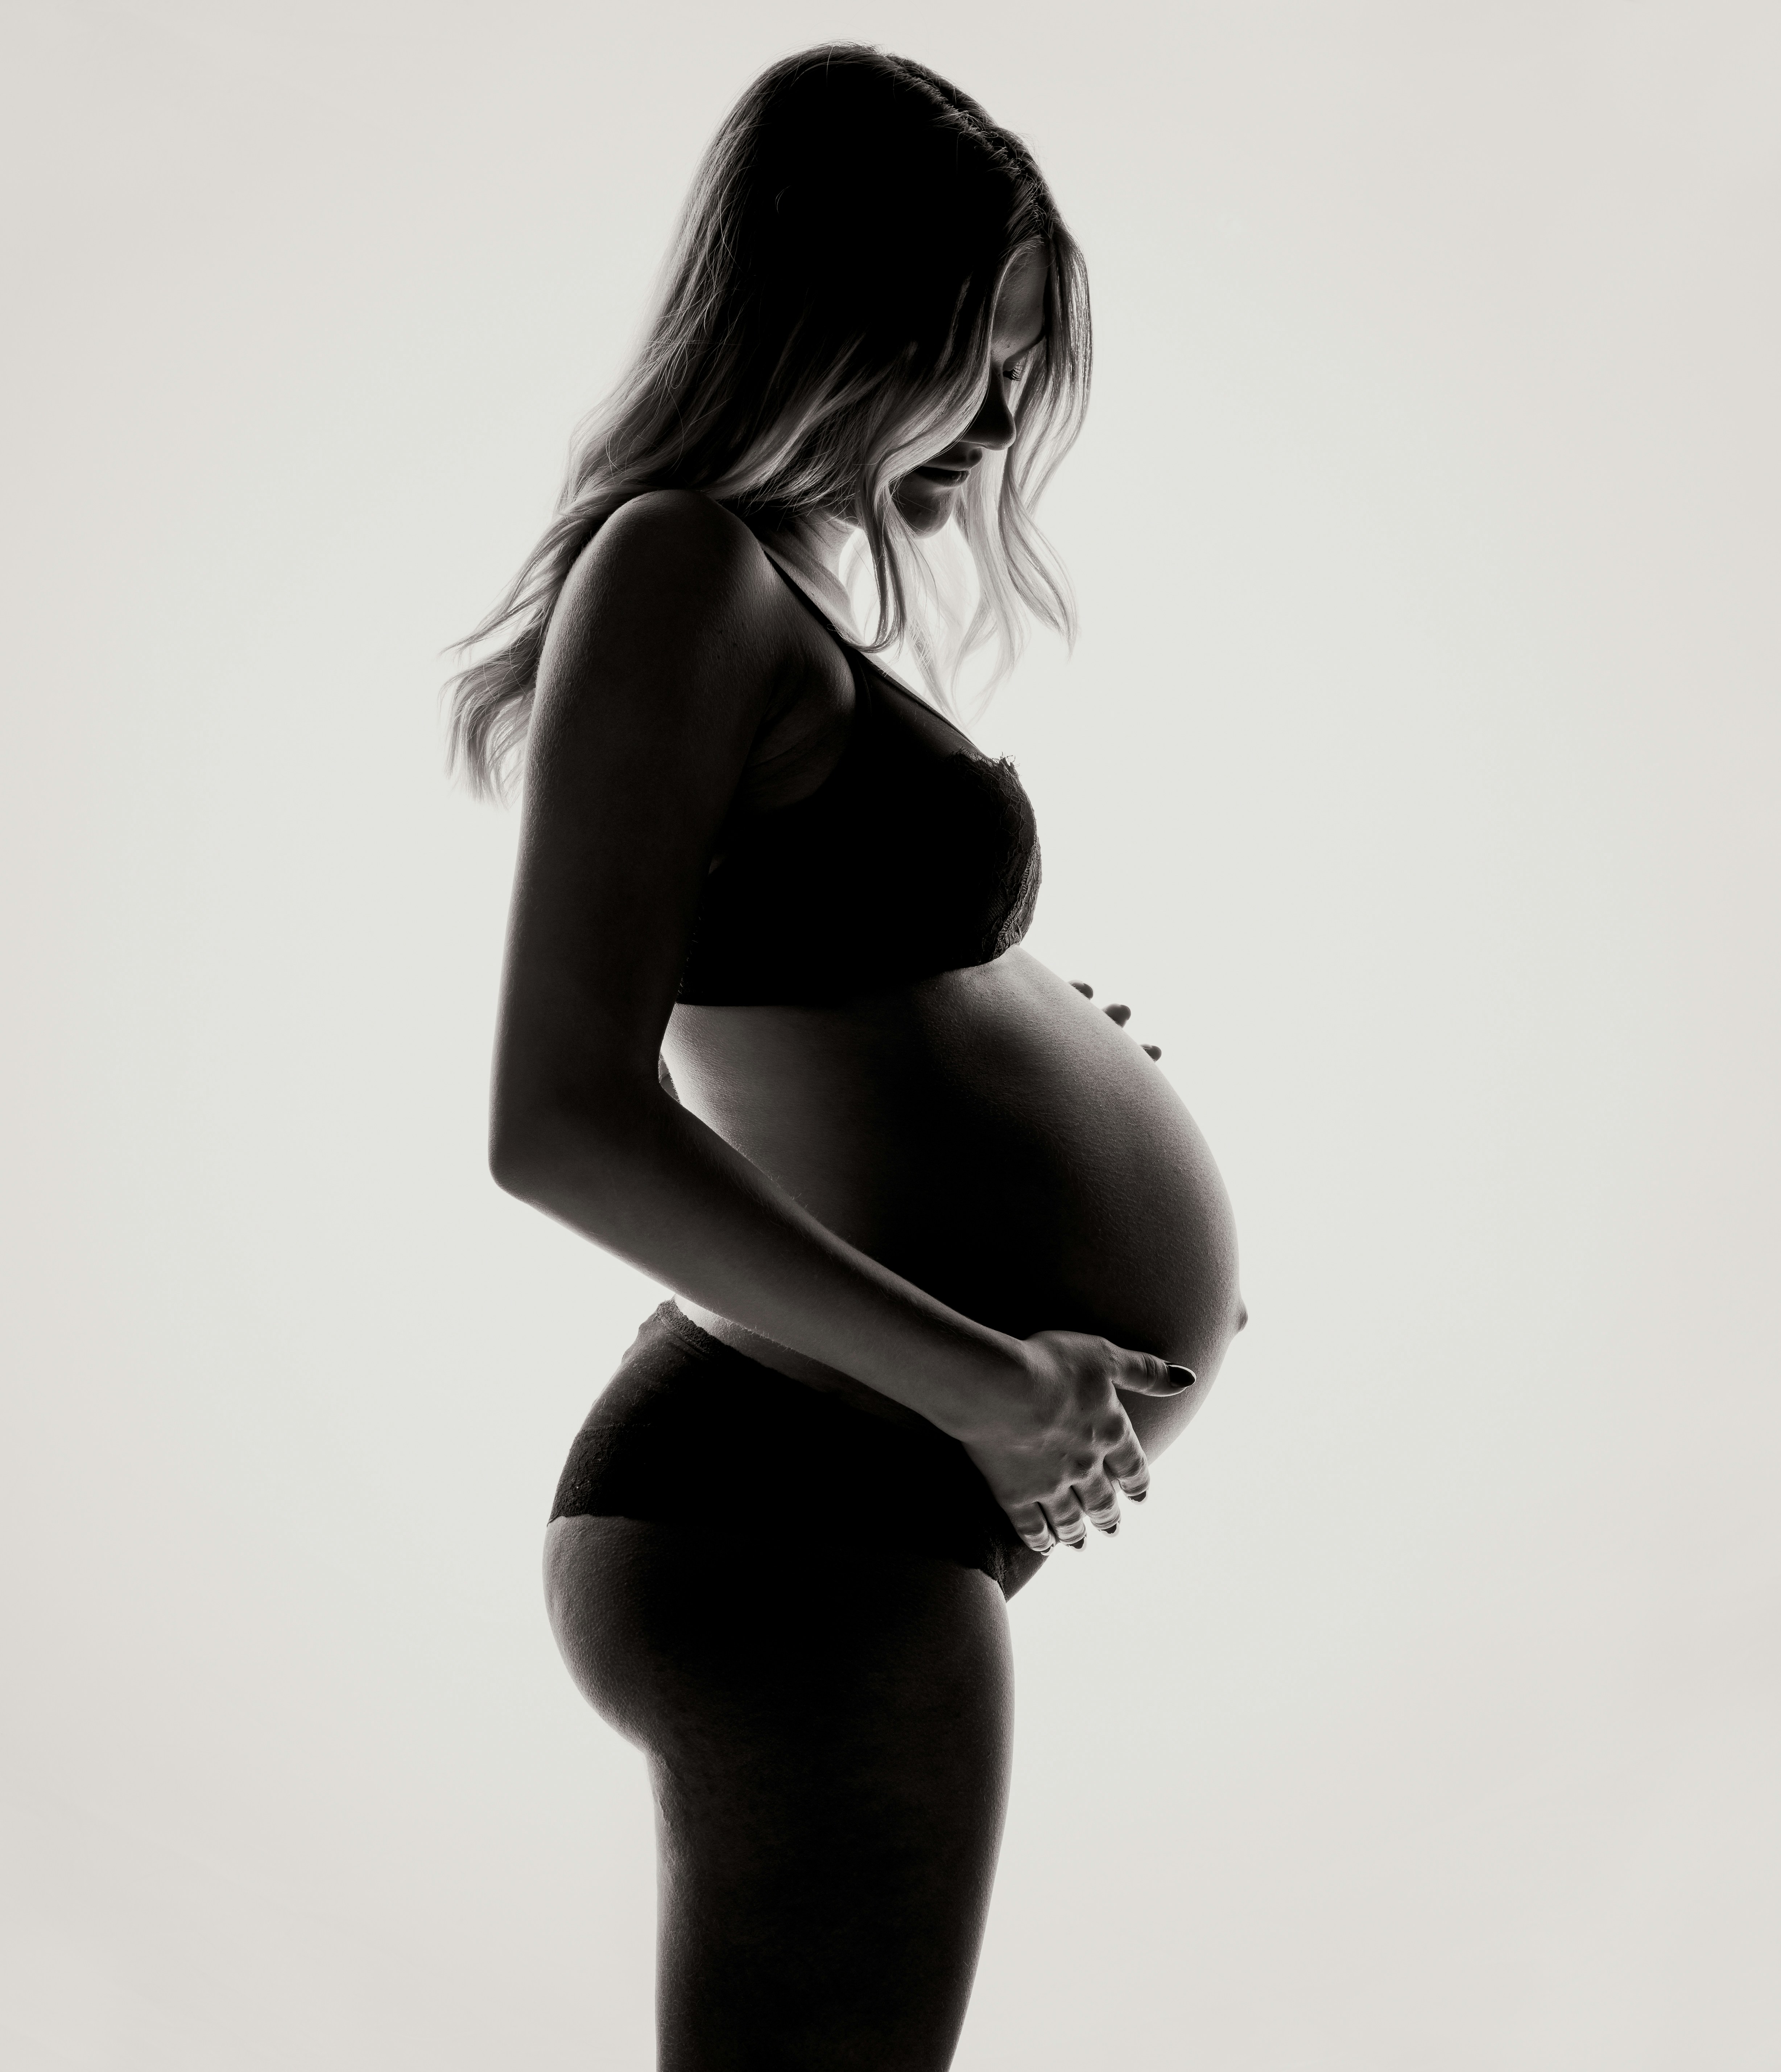 500+ Pregnant Belly Pictures Download Free Images on Unsplash photo